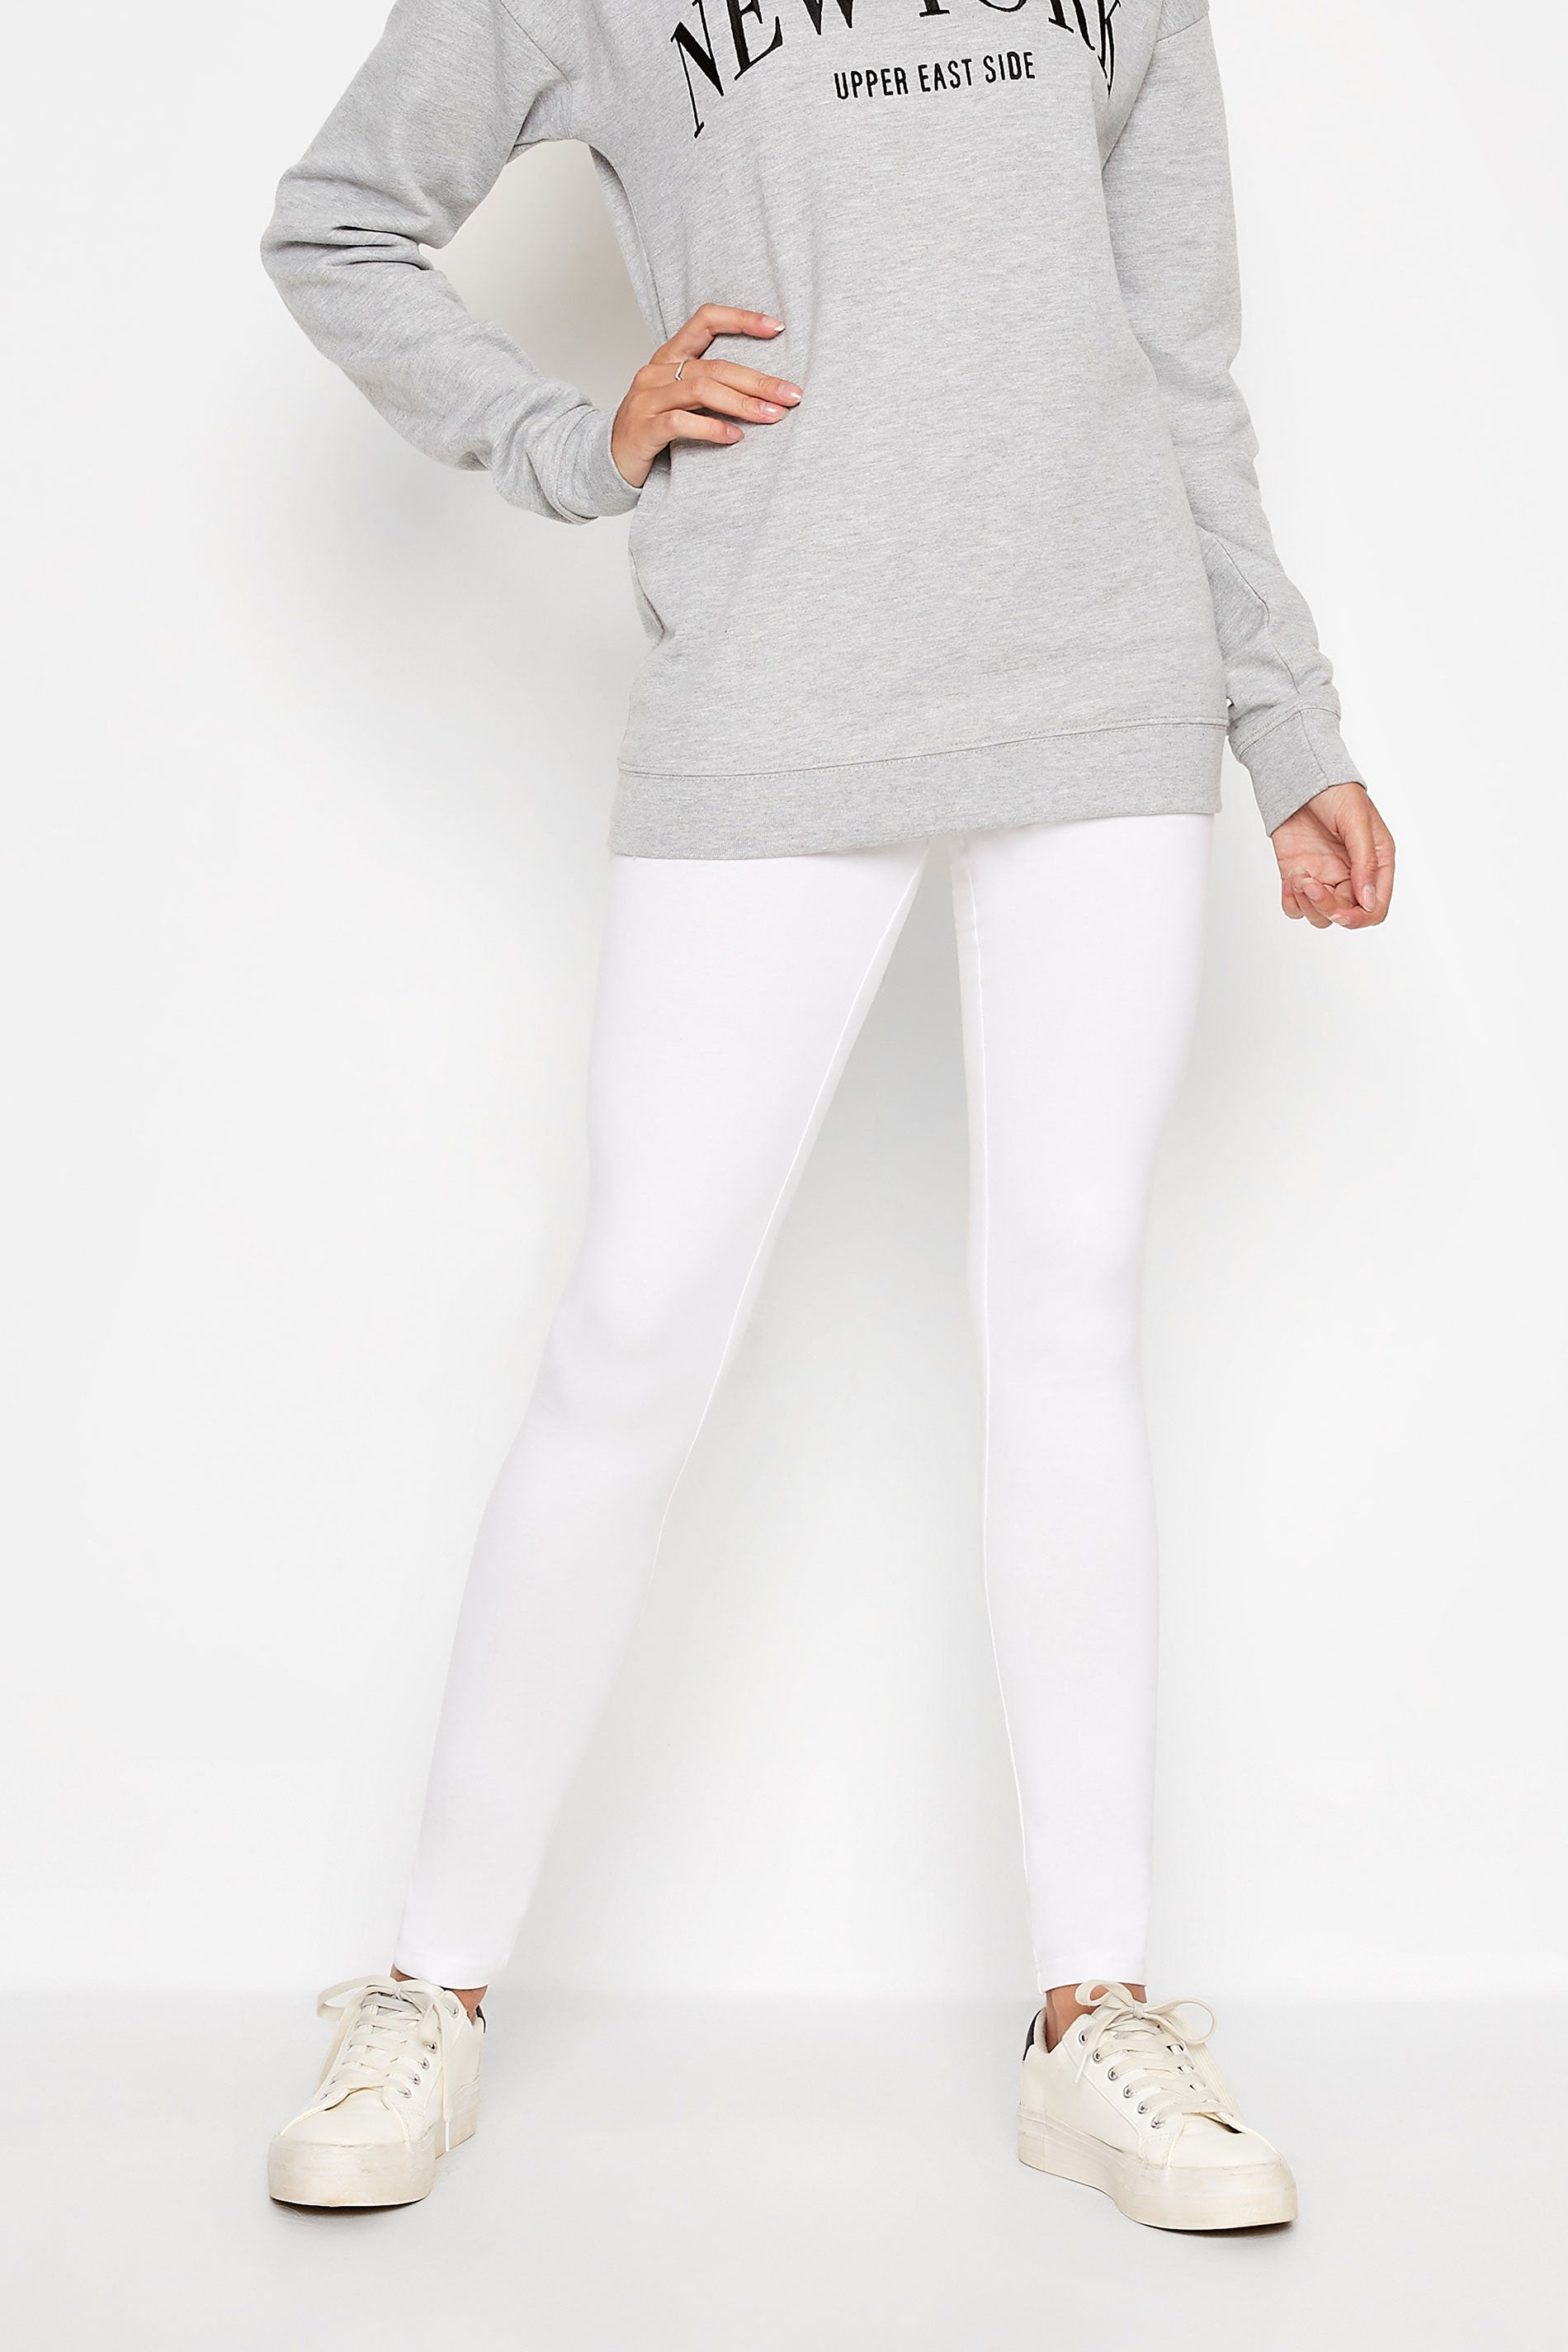 LTS MADE FOR GOOD White Organic Stretch Cotton Leggings – Search